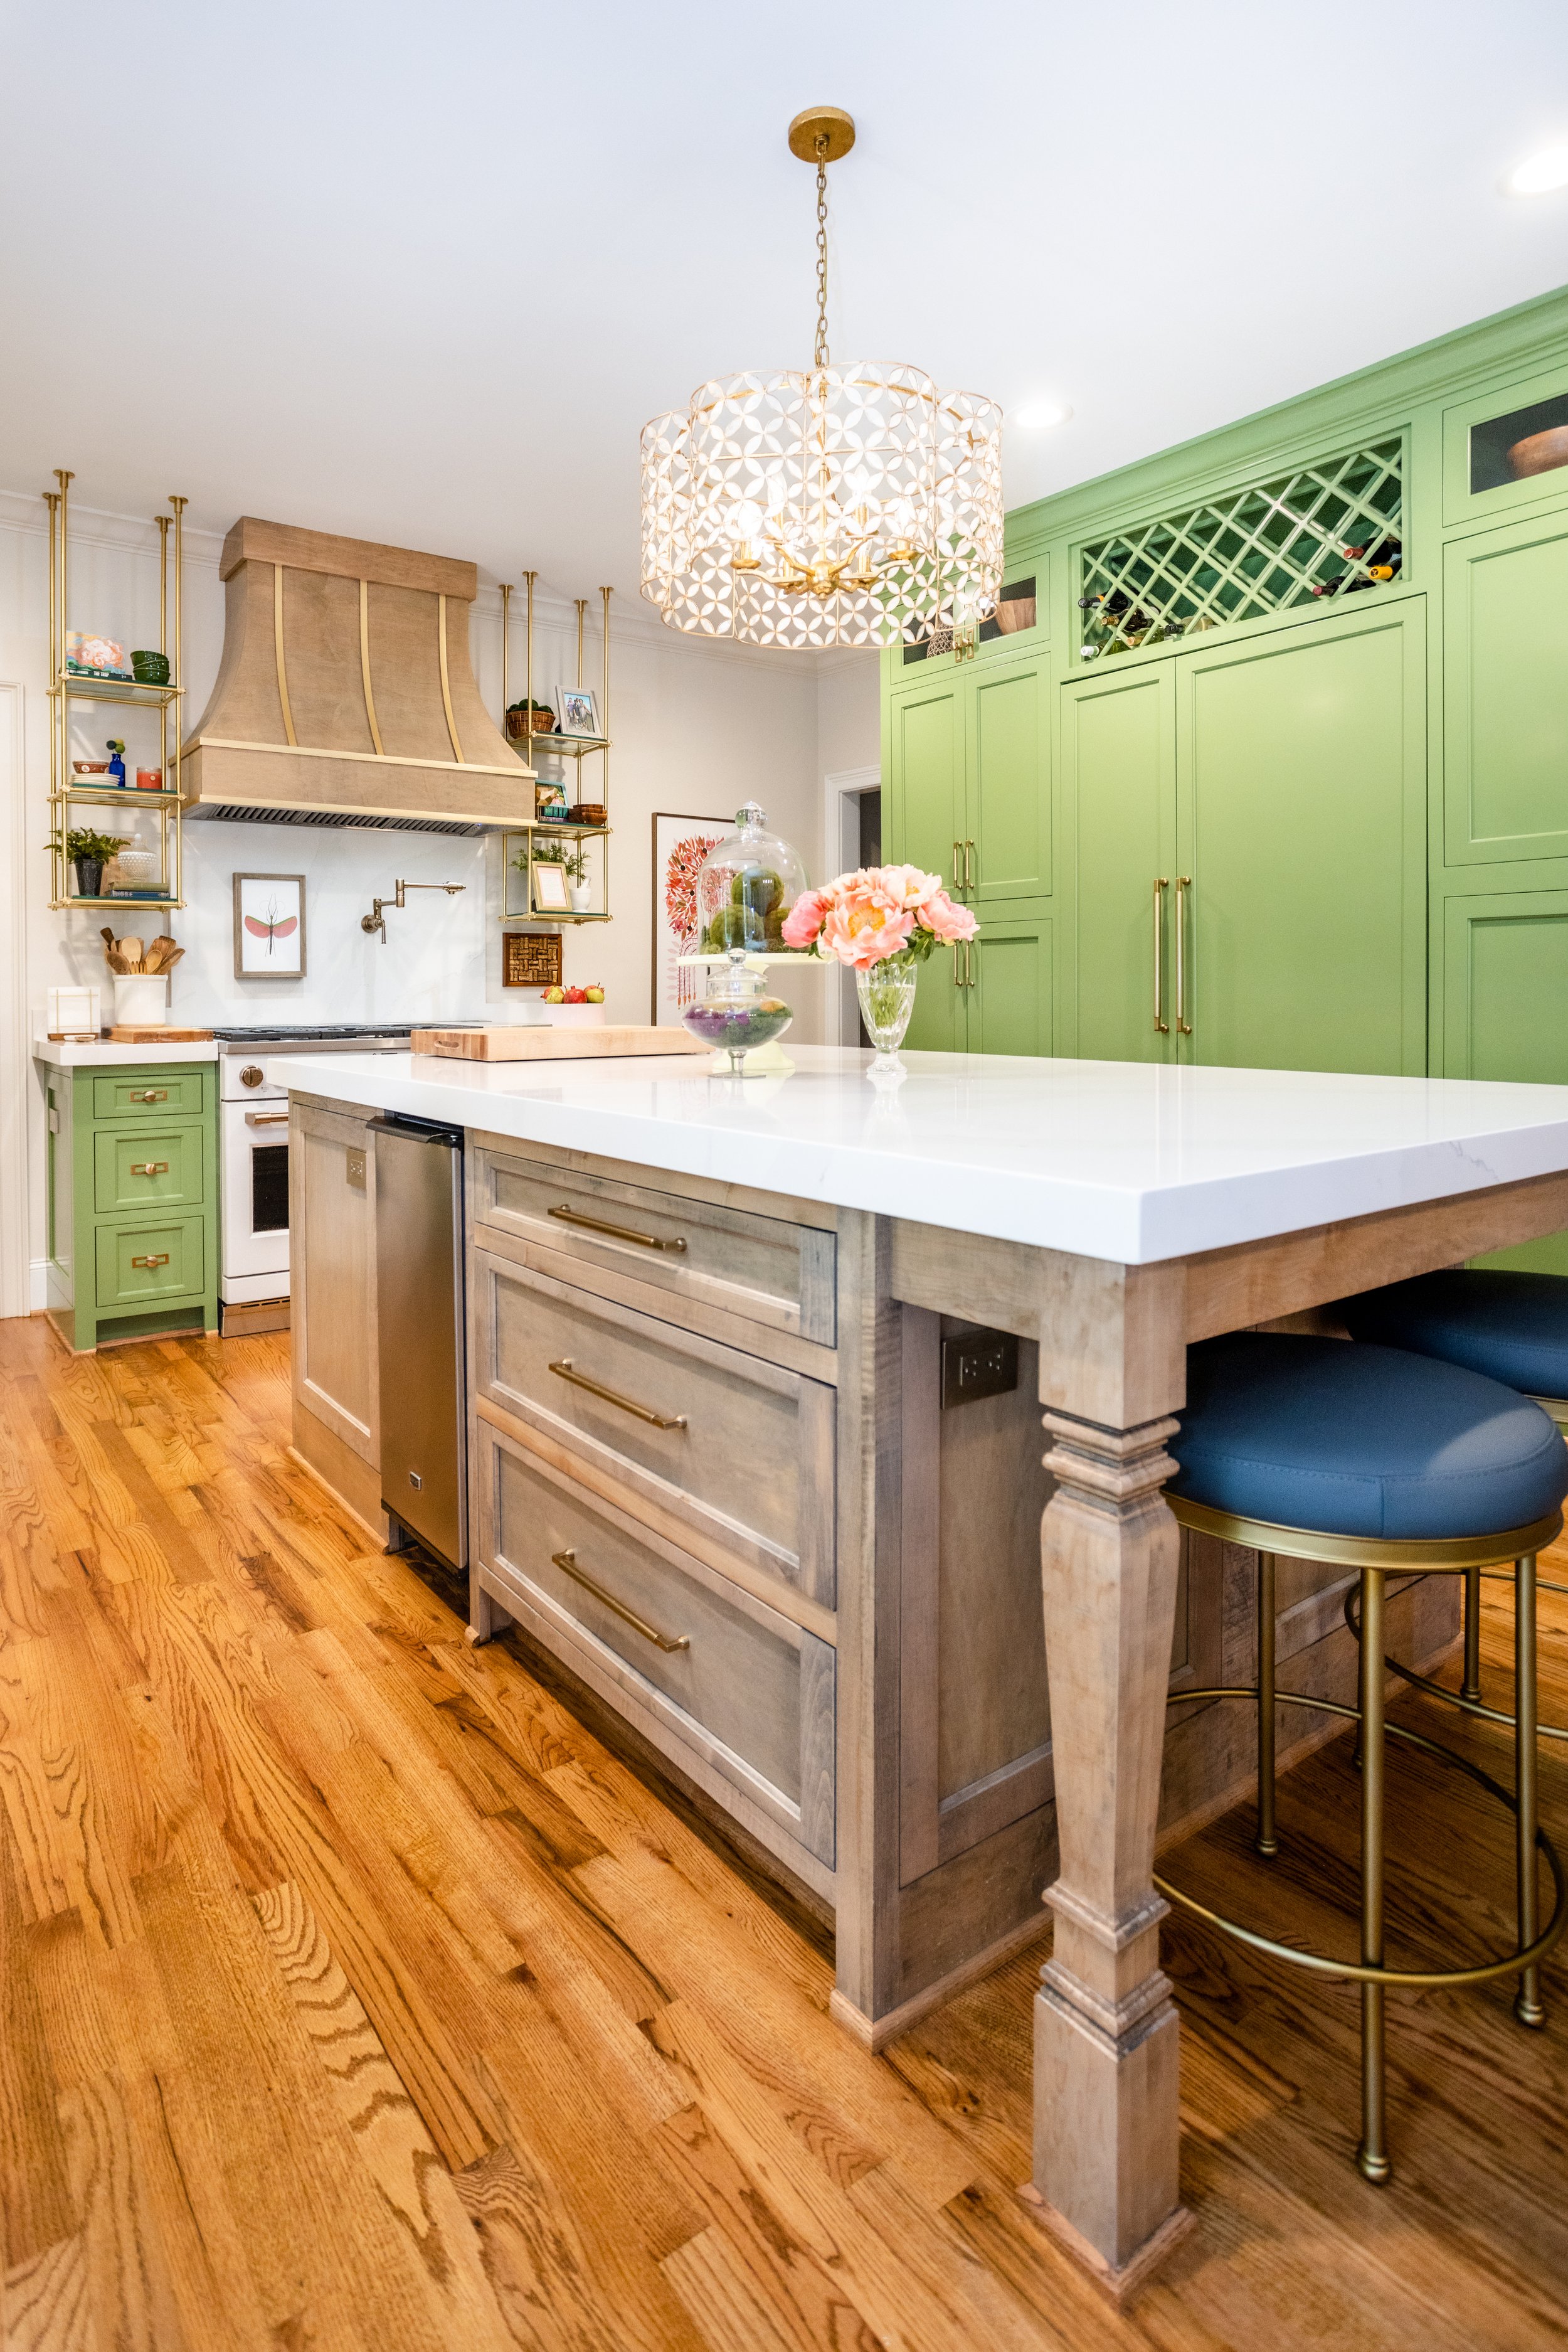 Country style kitchen with mint green, olive green accents